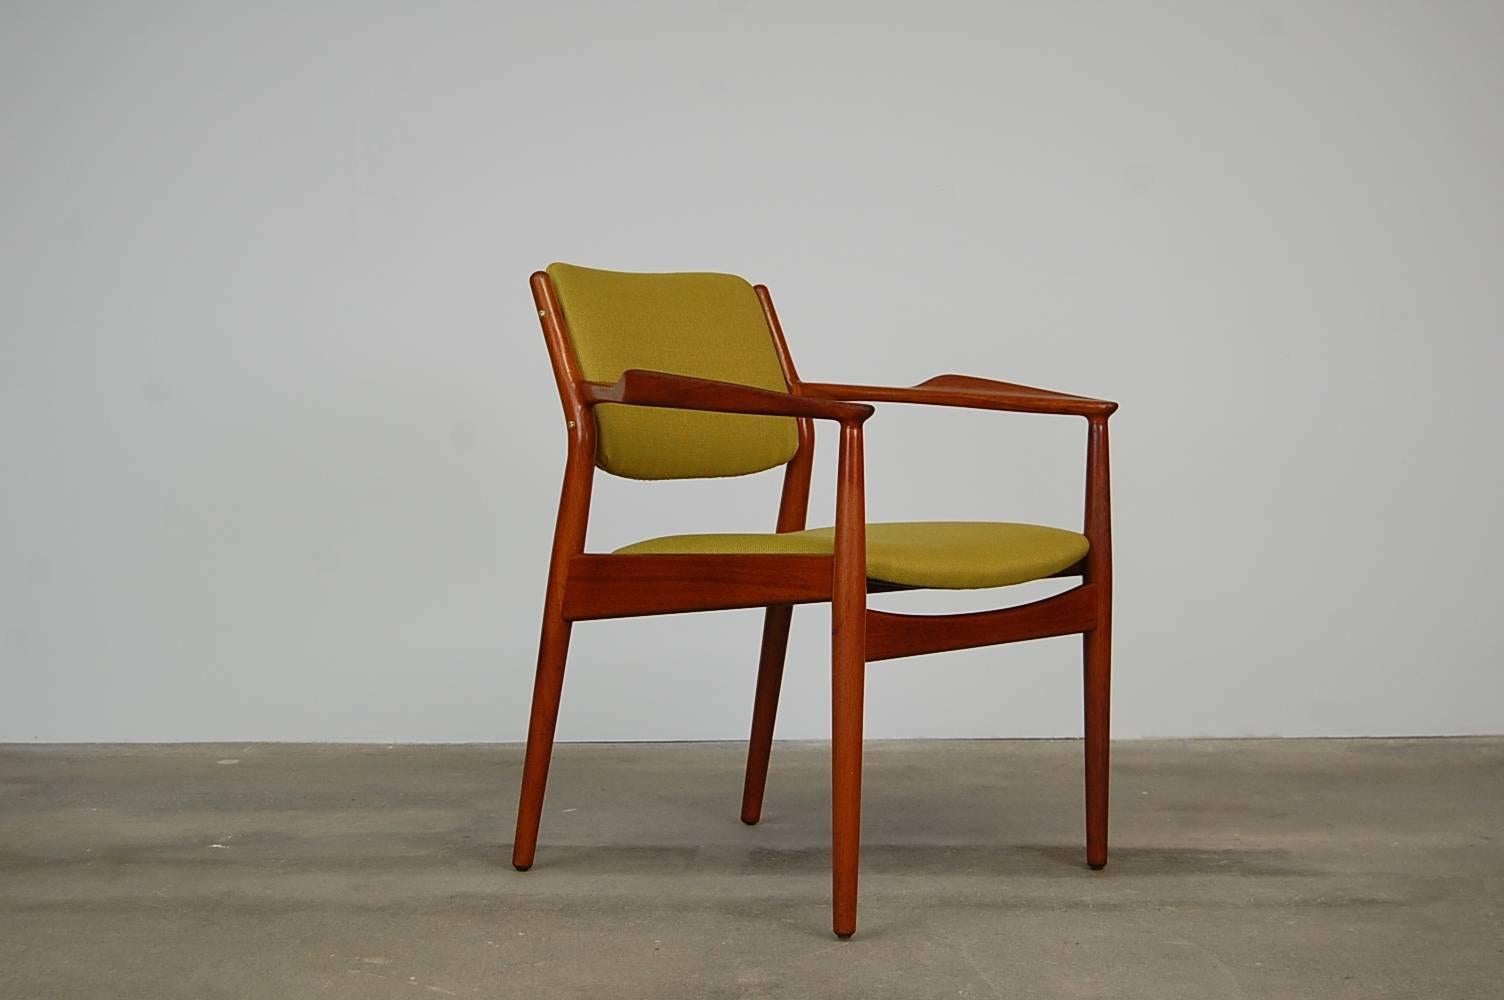 Set of eight dining chairs (two armchairs, and six sides) in teak, designed by Arne Vodder for George Tanier, circa 1967. Chairs have been fully restored. Newly oiled teak, and newly upholstered. All materials, including webbing and foam, have been